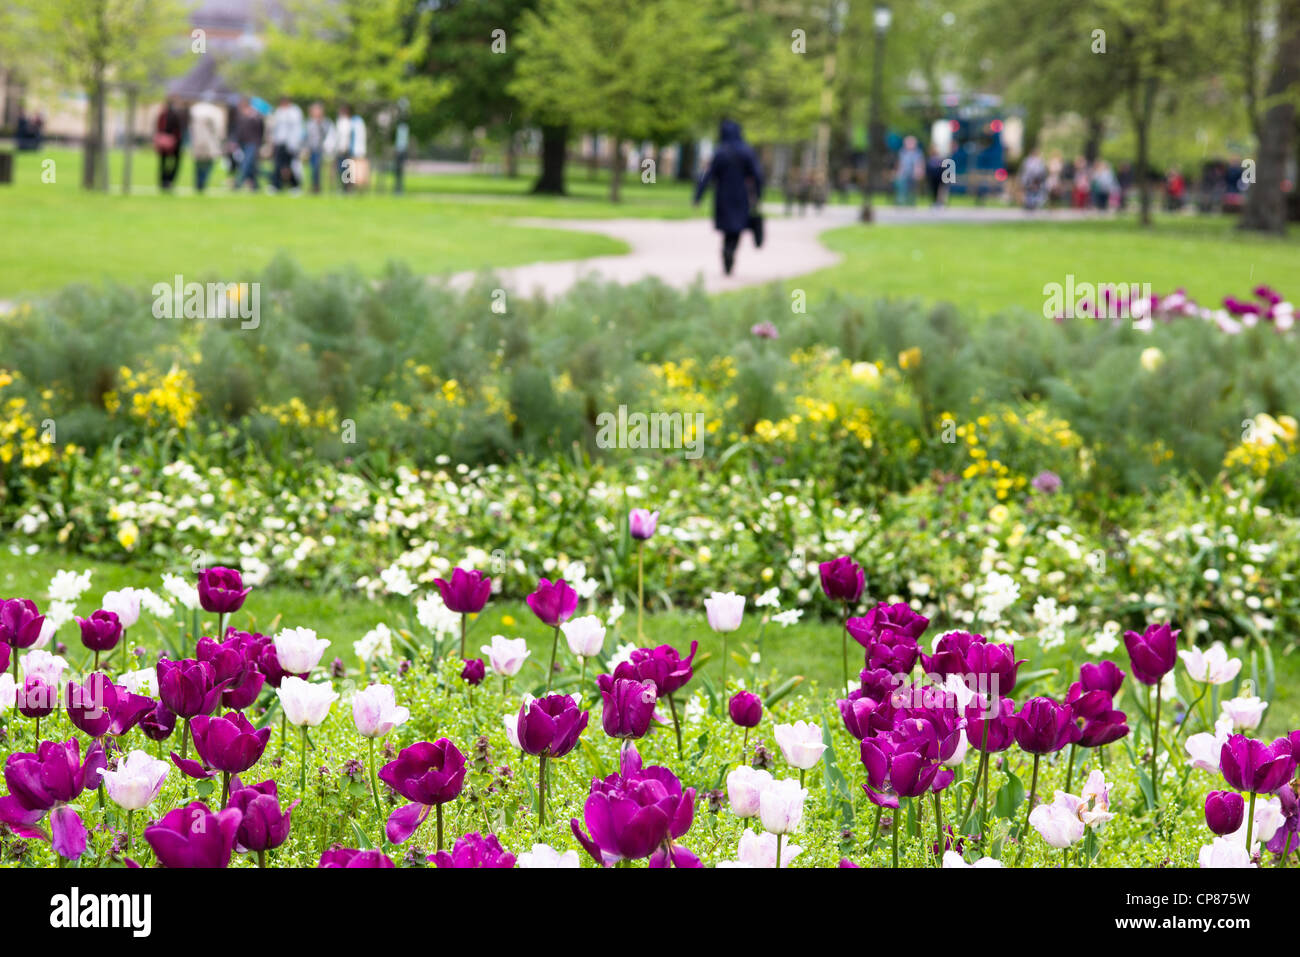 Spring flowers in Christ's Pieces, Cambridge, England. Stock Photo